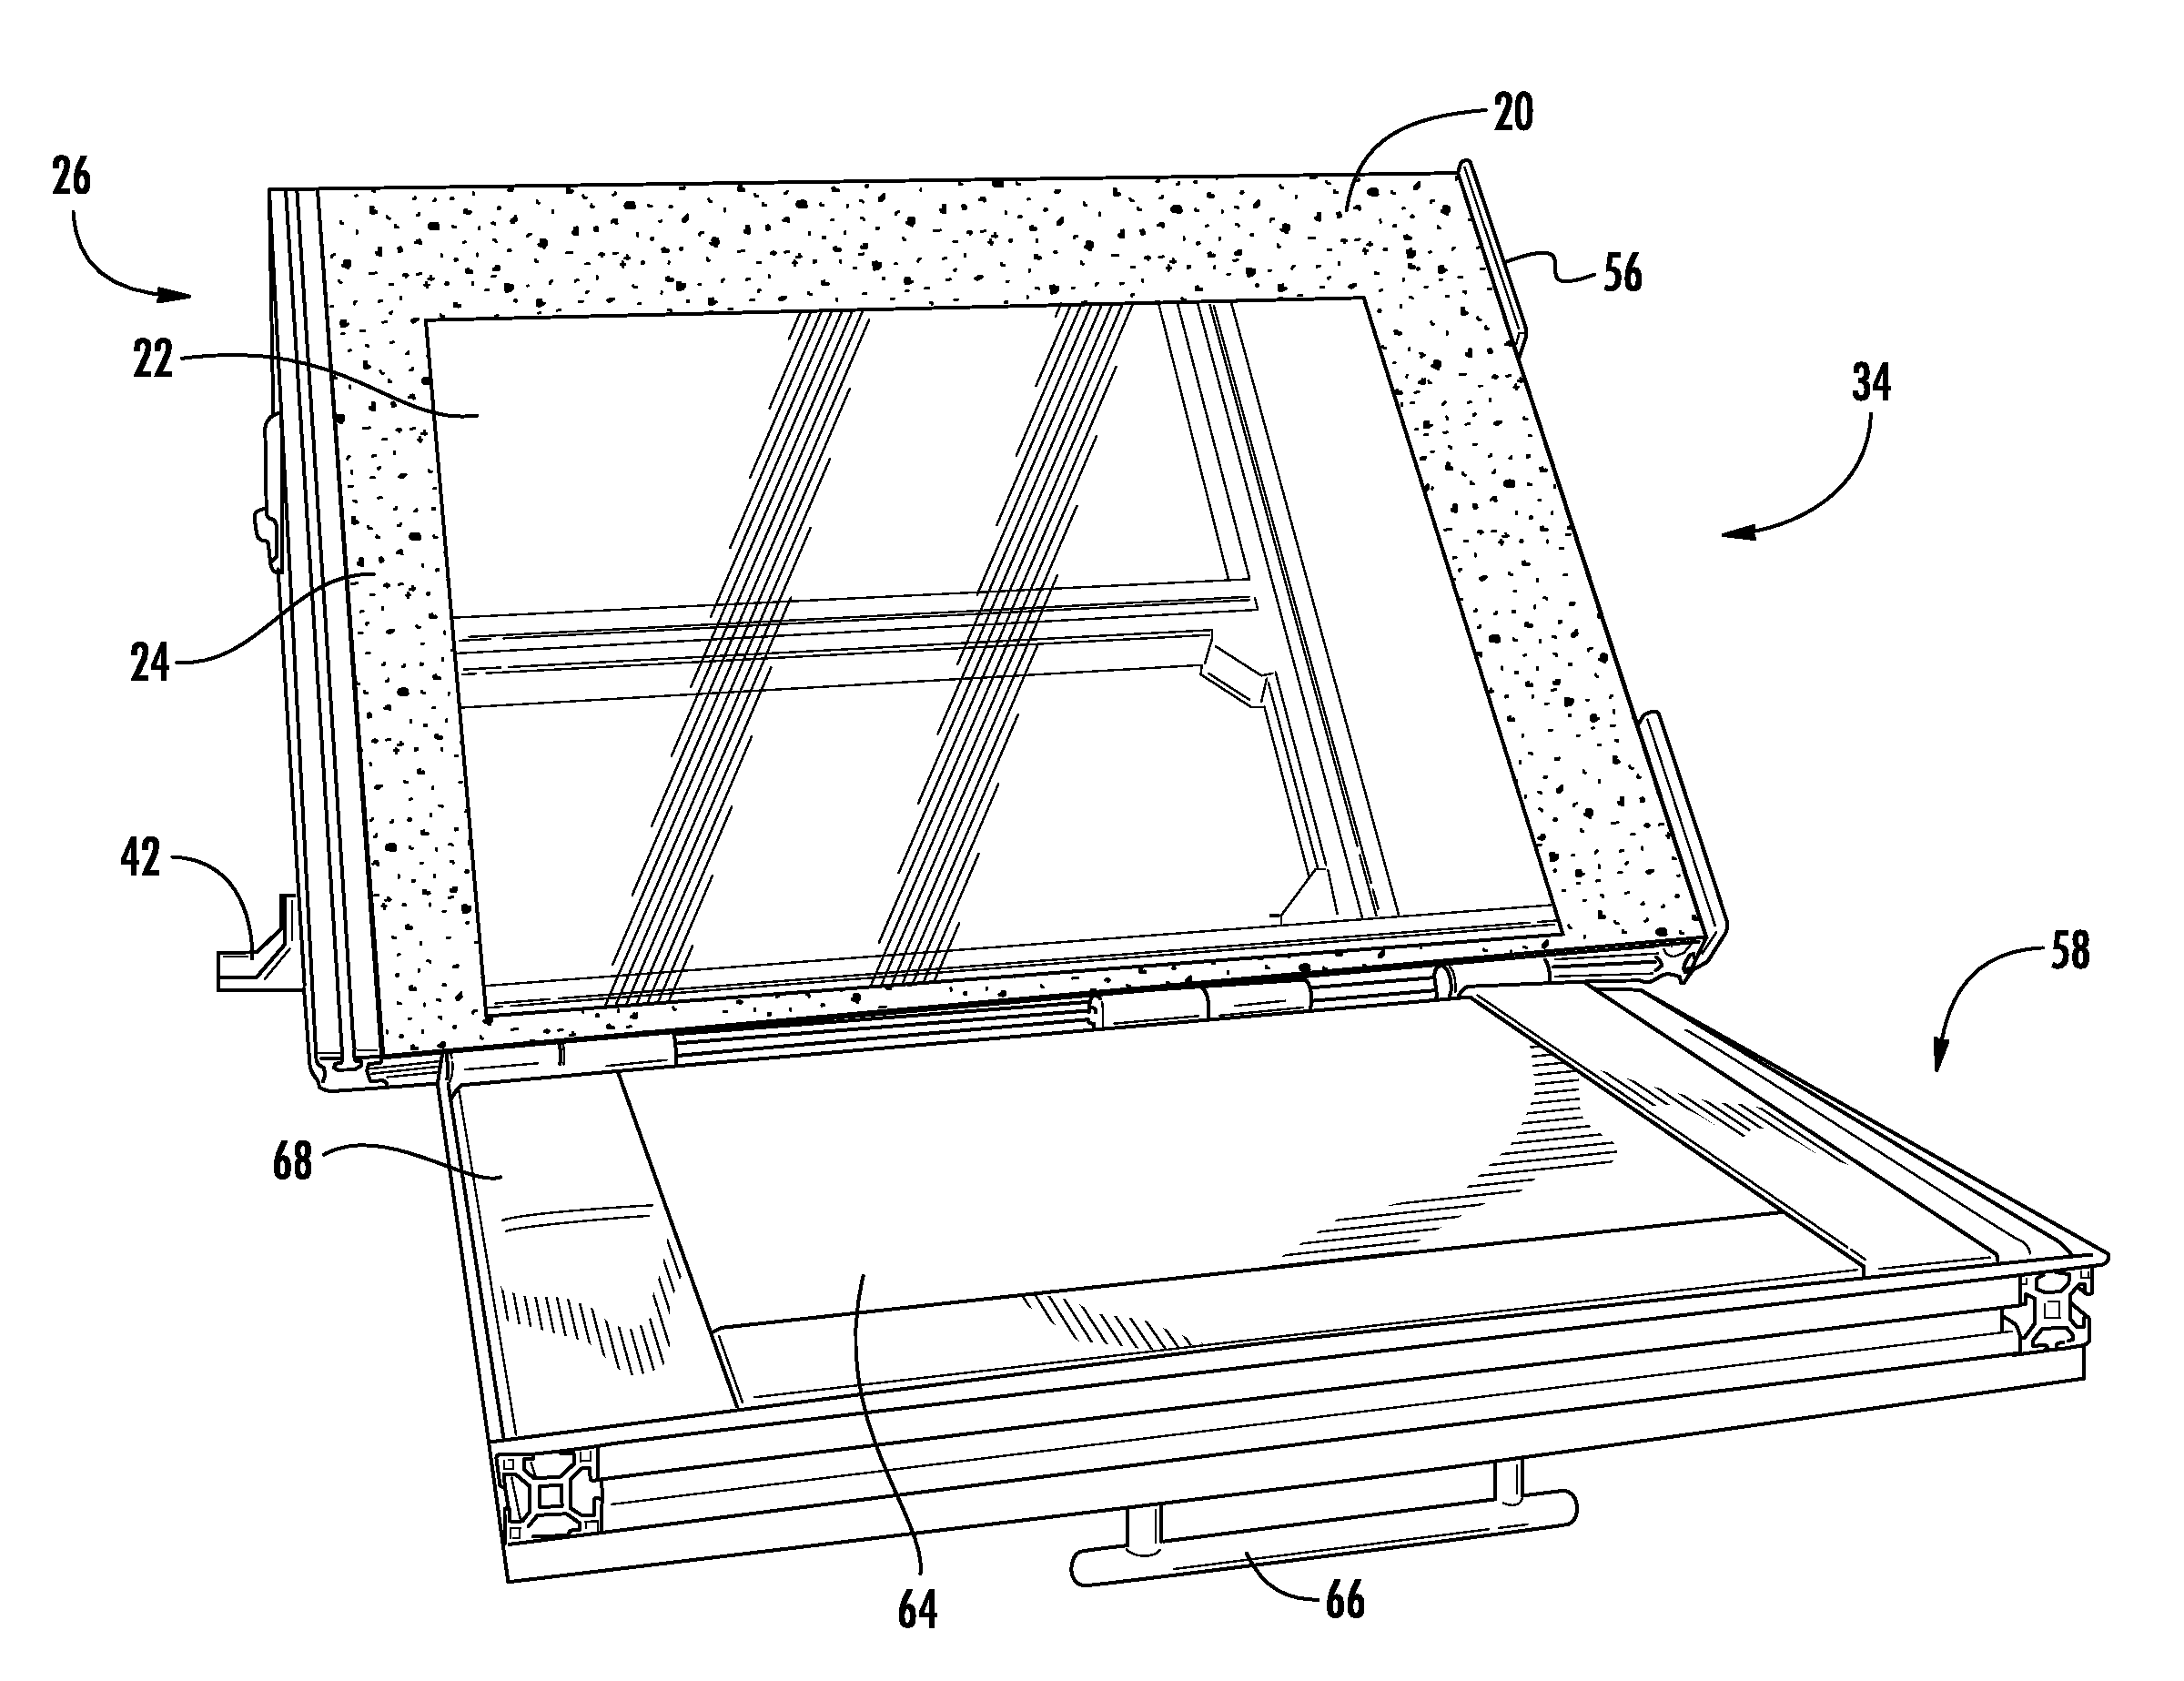 Home appliance with treated window and method for treating the window